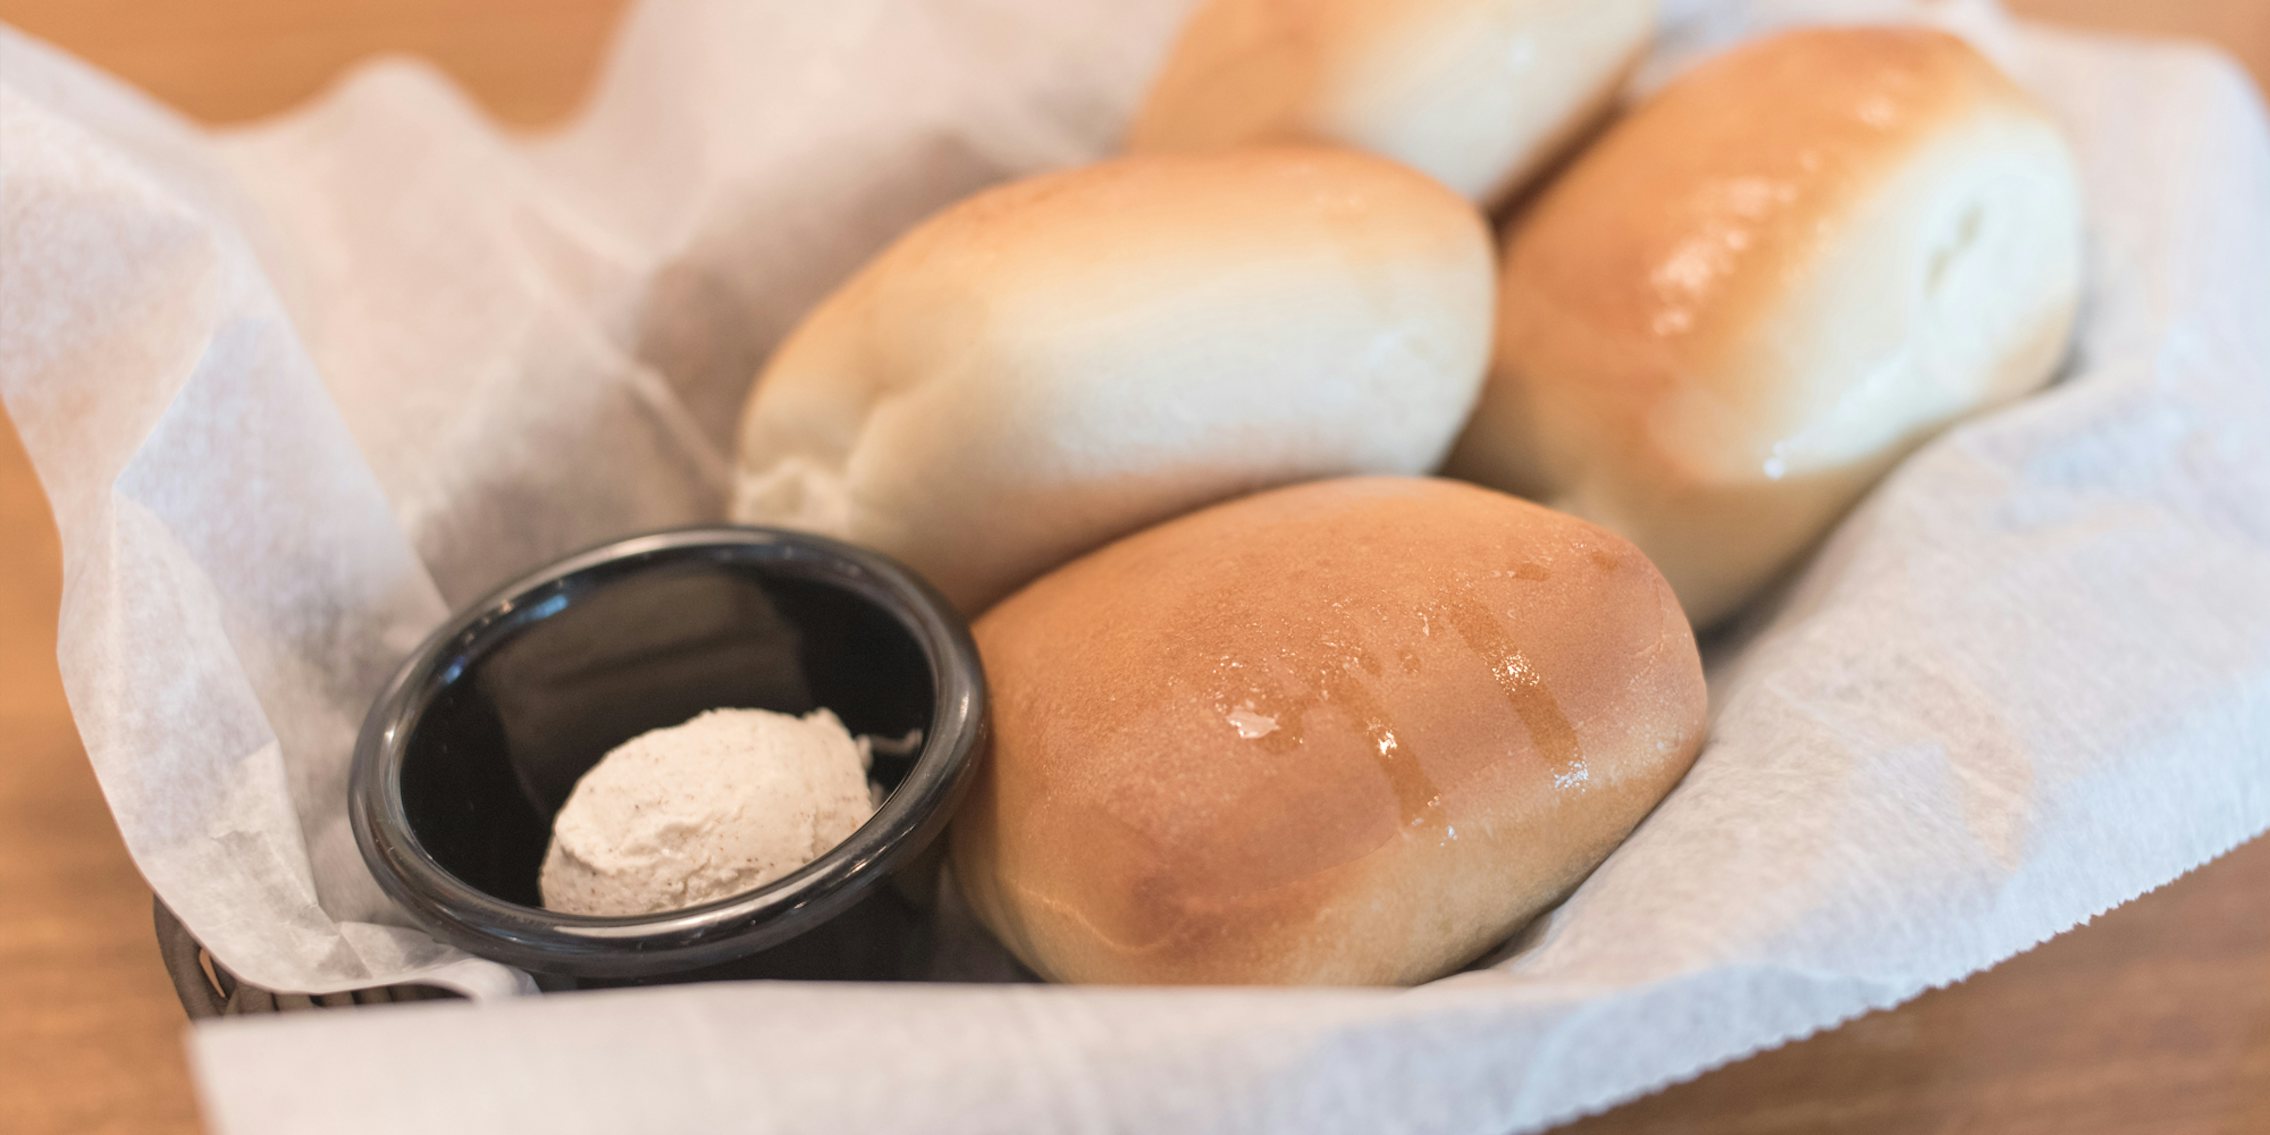 Texas Roadhouse rolls in basket with butter